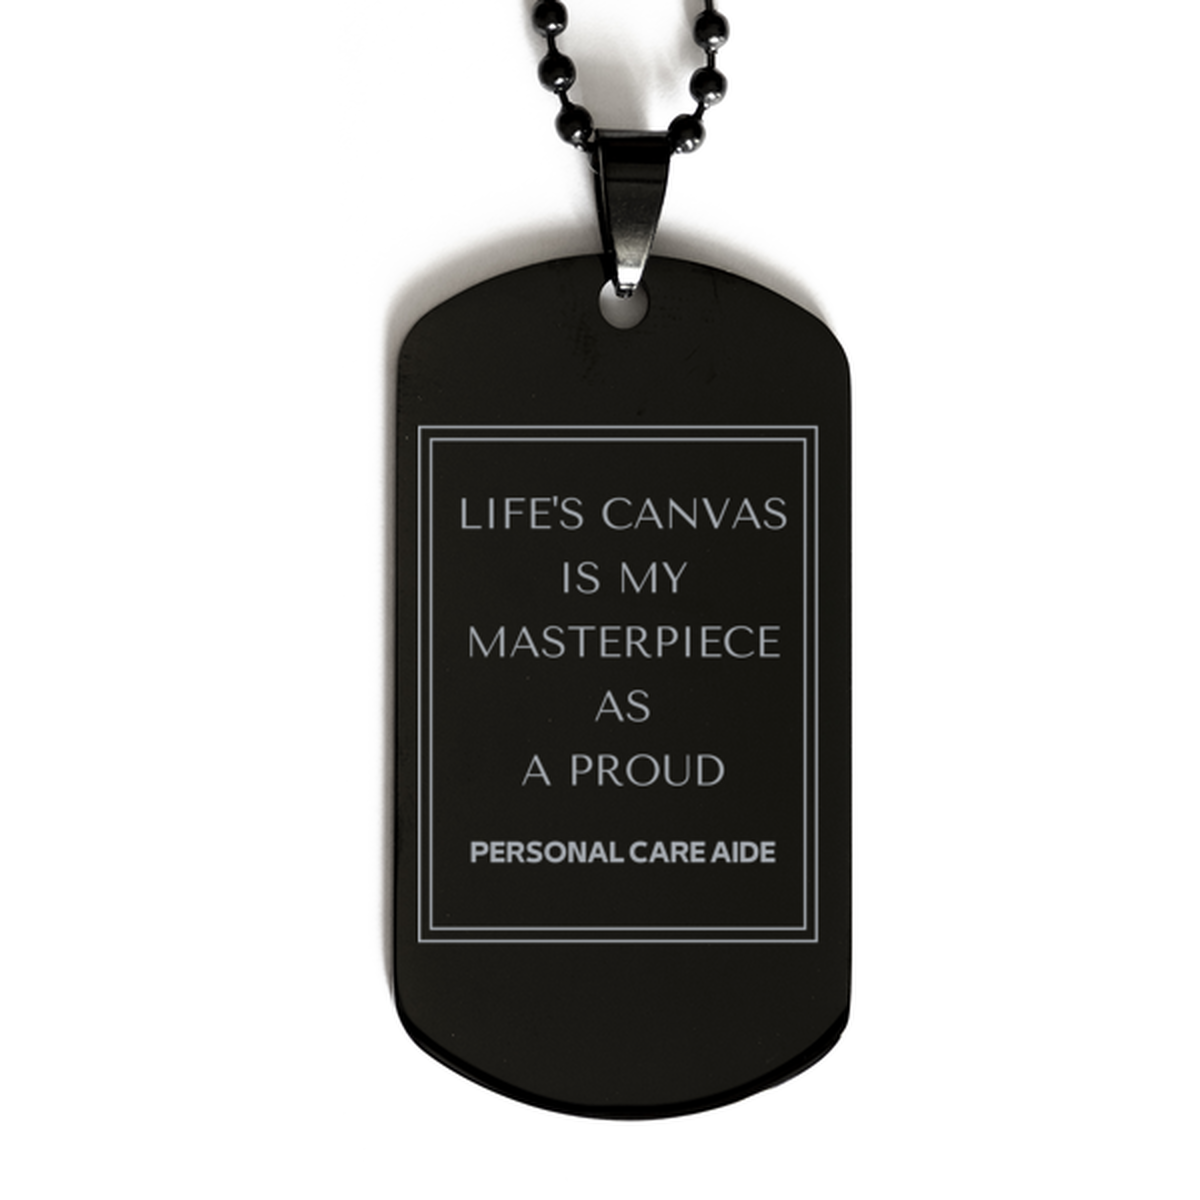 Proud Personal Care Aide Gifts, Life's canvas is my masterpiece, Epic Birthday Christmas Unique Black Dog Tag For Personal Care Aide, Coworkers, Men, Women, Friends